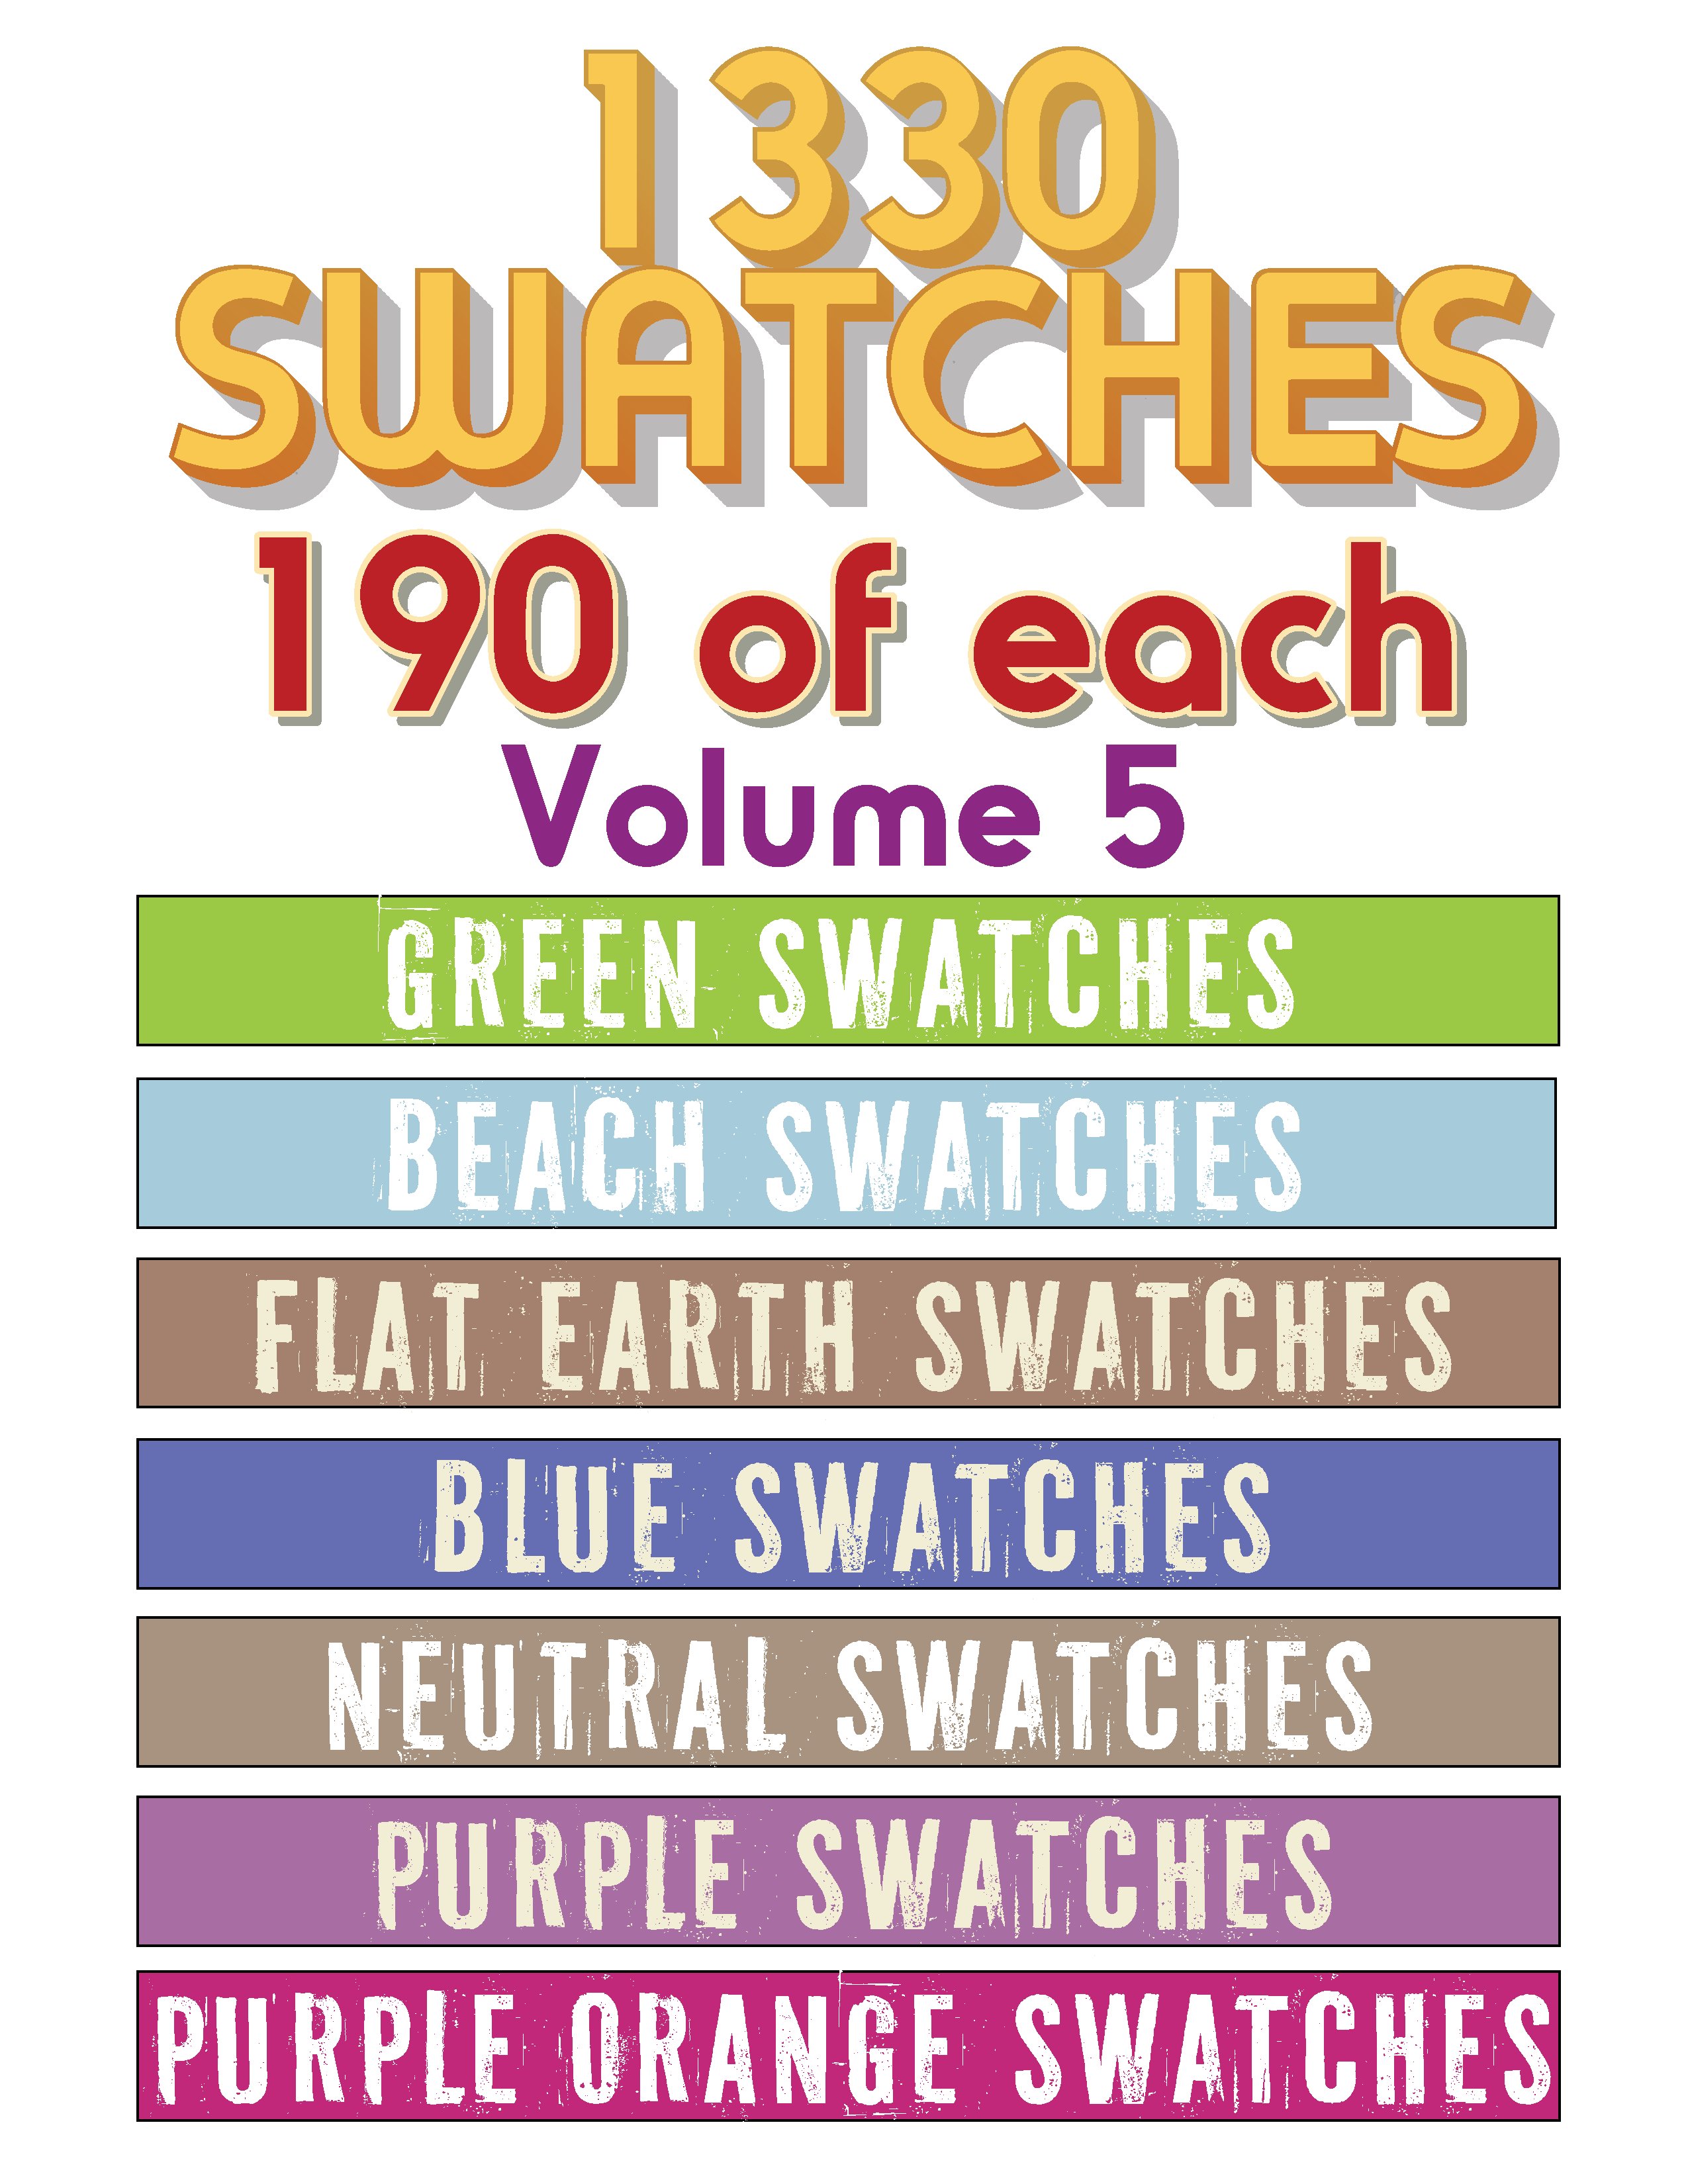 1330 Swatches - Volume 5cover image.